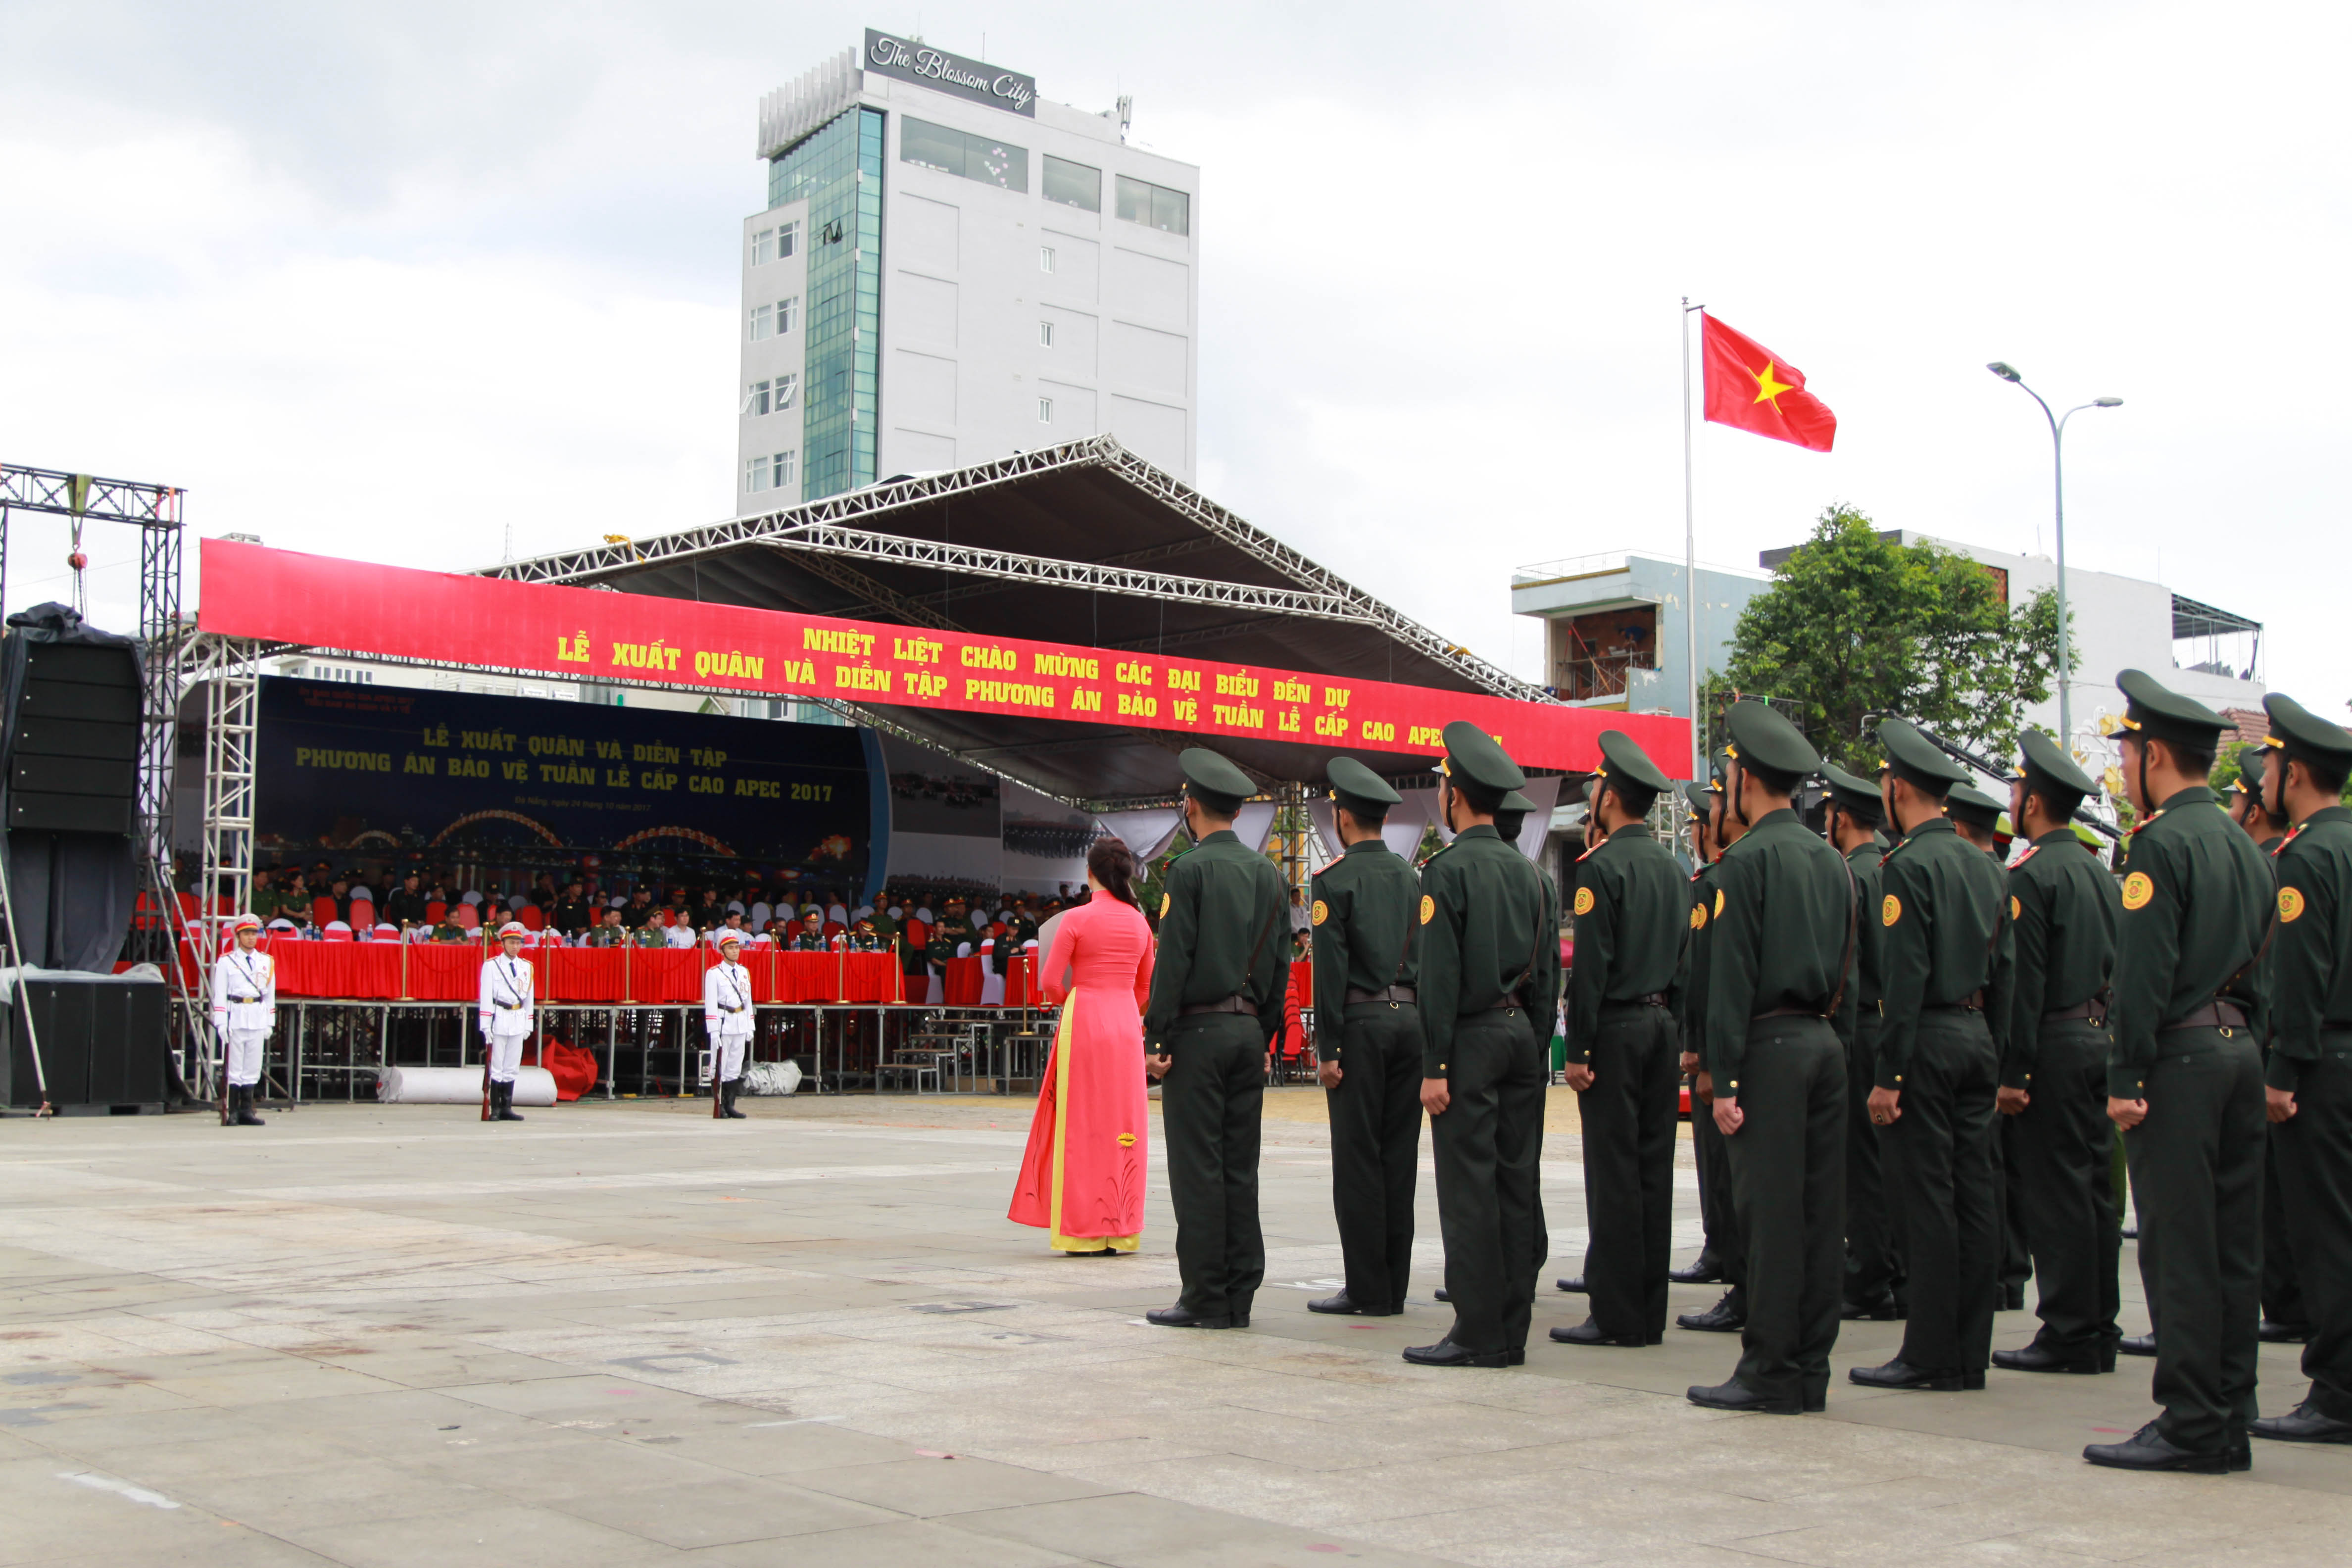 A ceremony was organized in the central Vietnamese city of Da Nang on October 22, 2017.